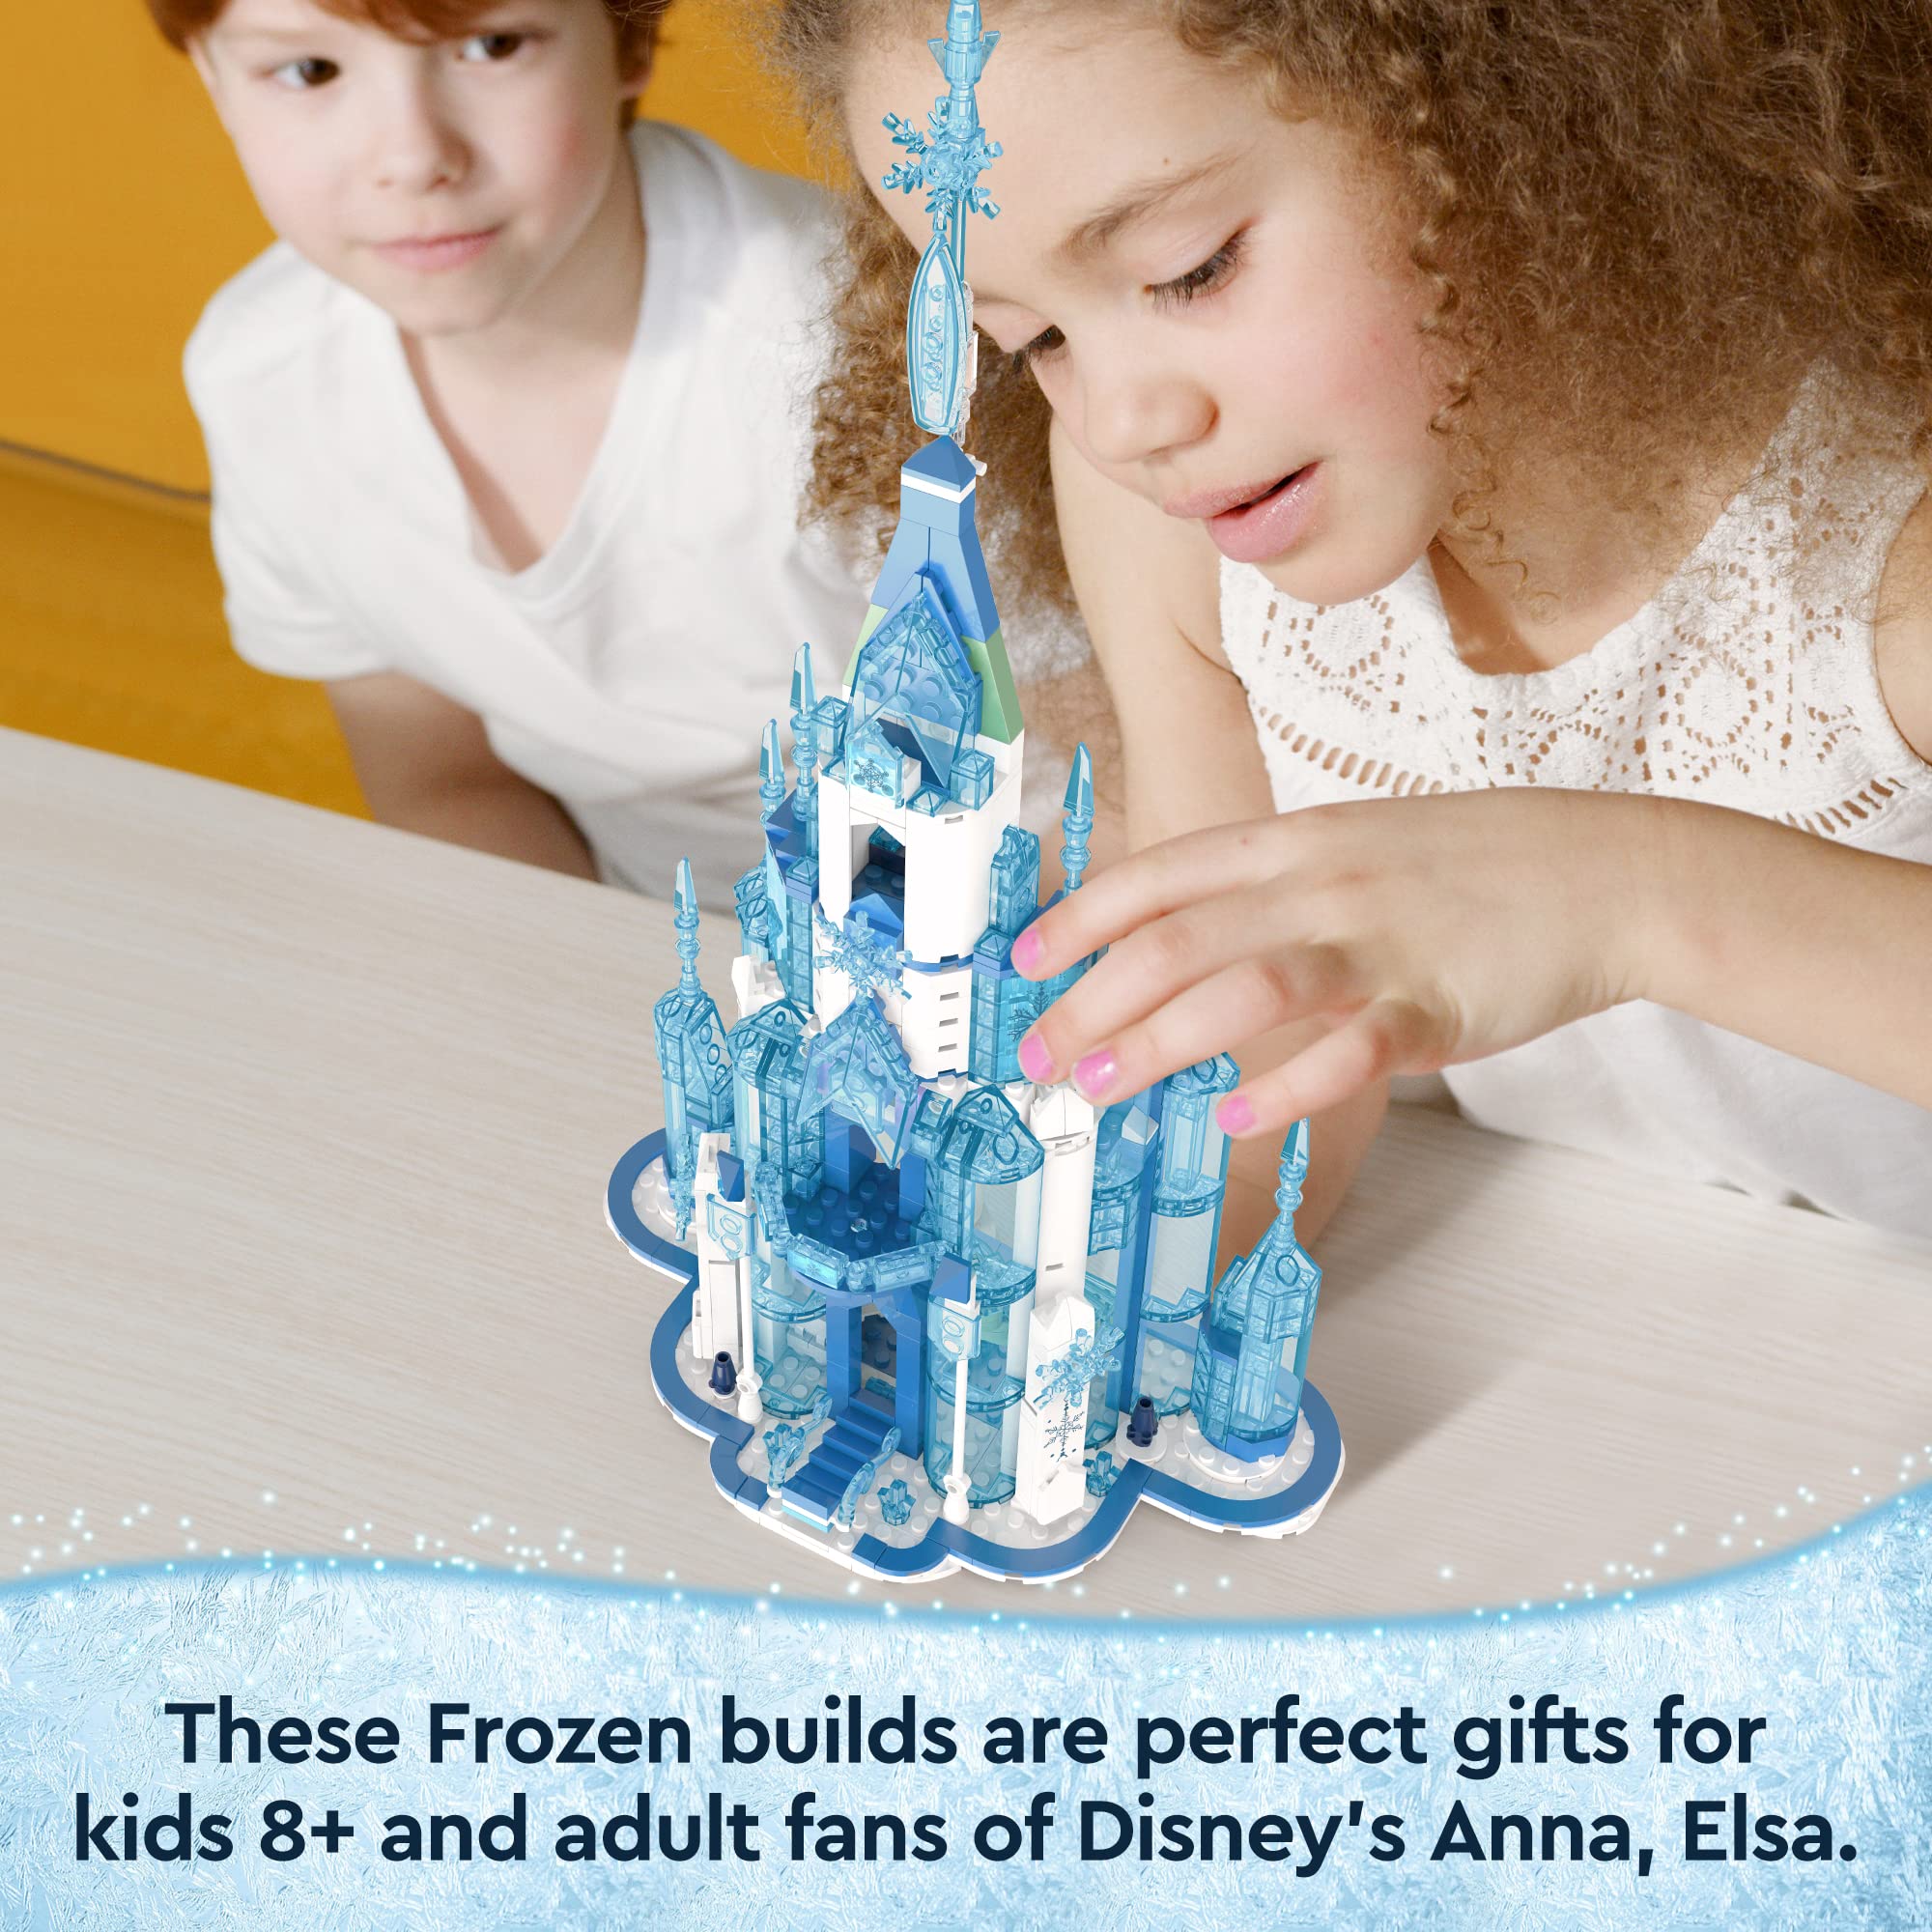 EDUCIRO Friends Frozen Ice Castle Building Girls Toys (671 Pieces), Princess Toys House for Girl, Birthday Gift Idea with Girls, Boys, and Kids Aged 7 Years Old+